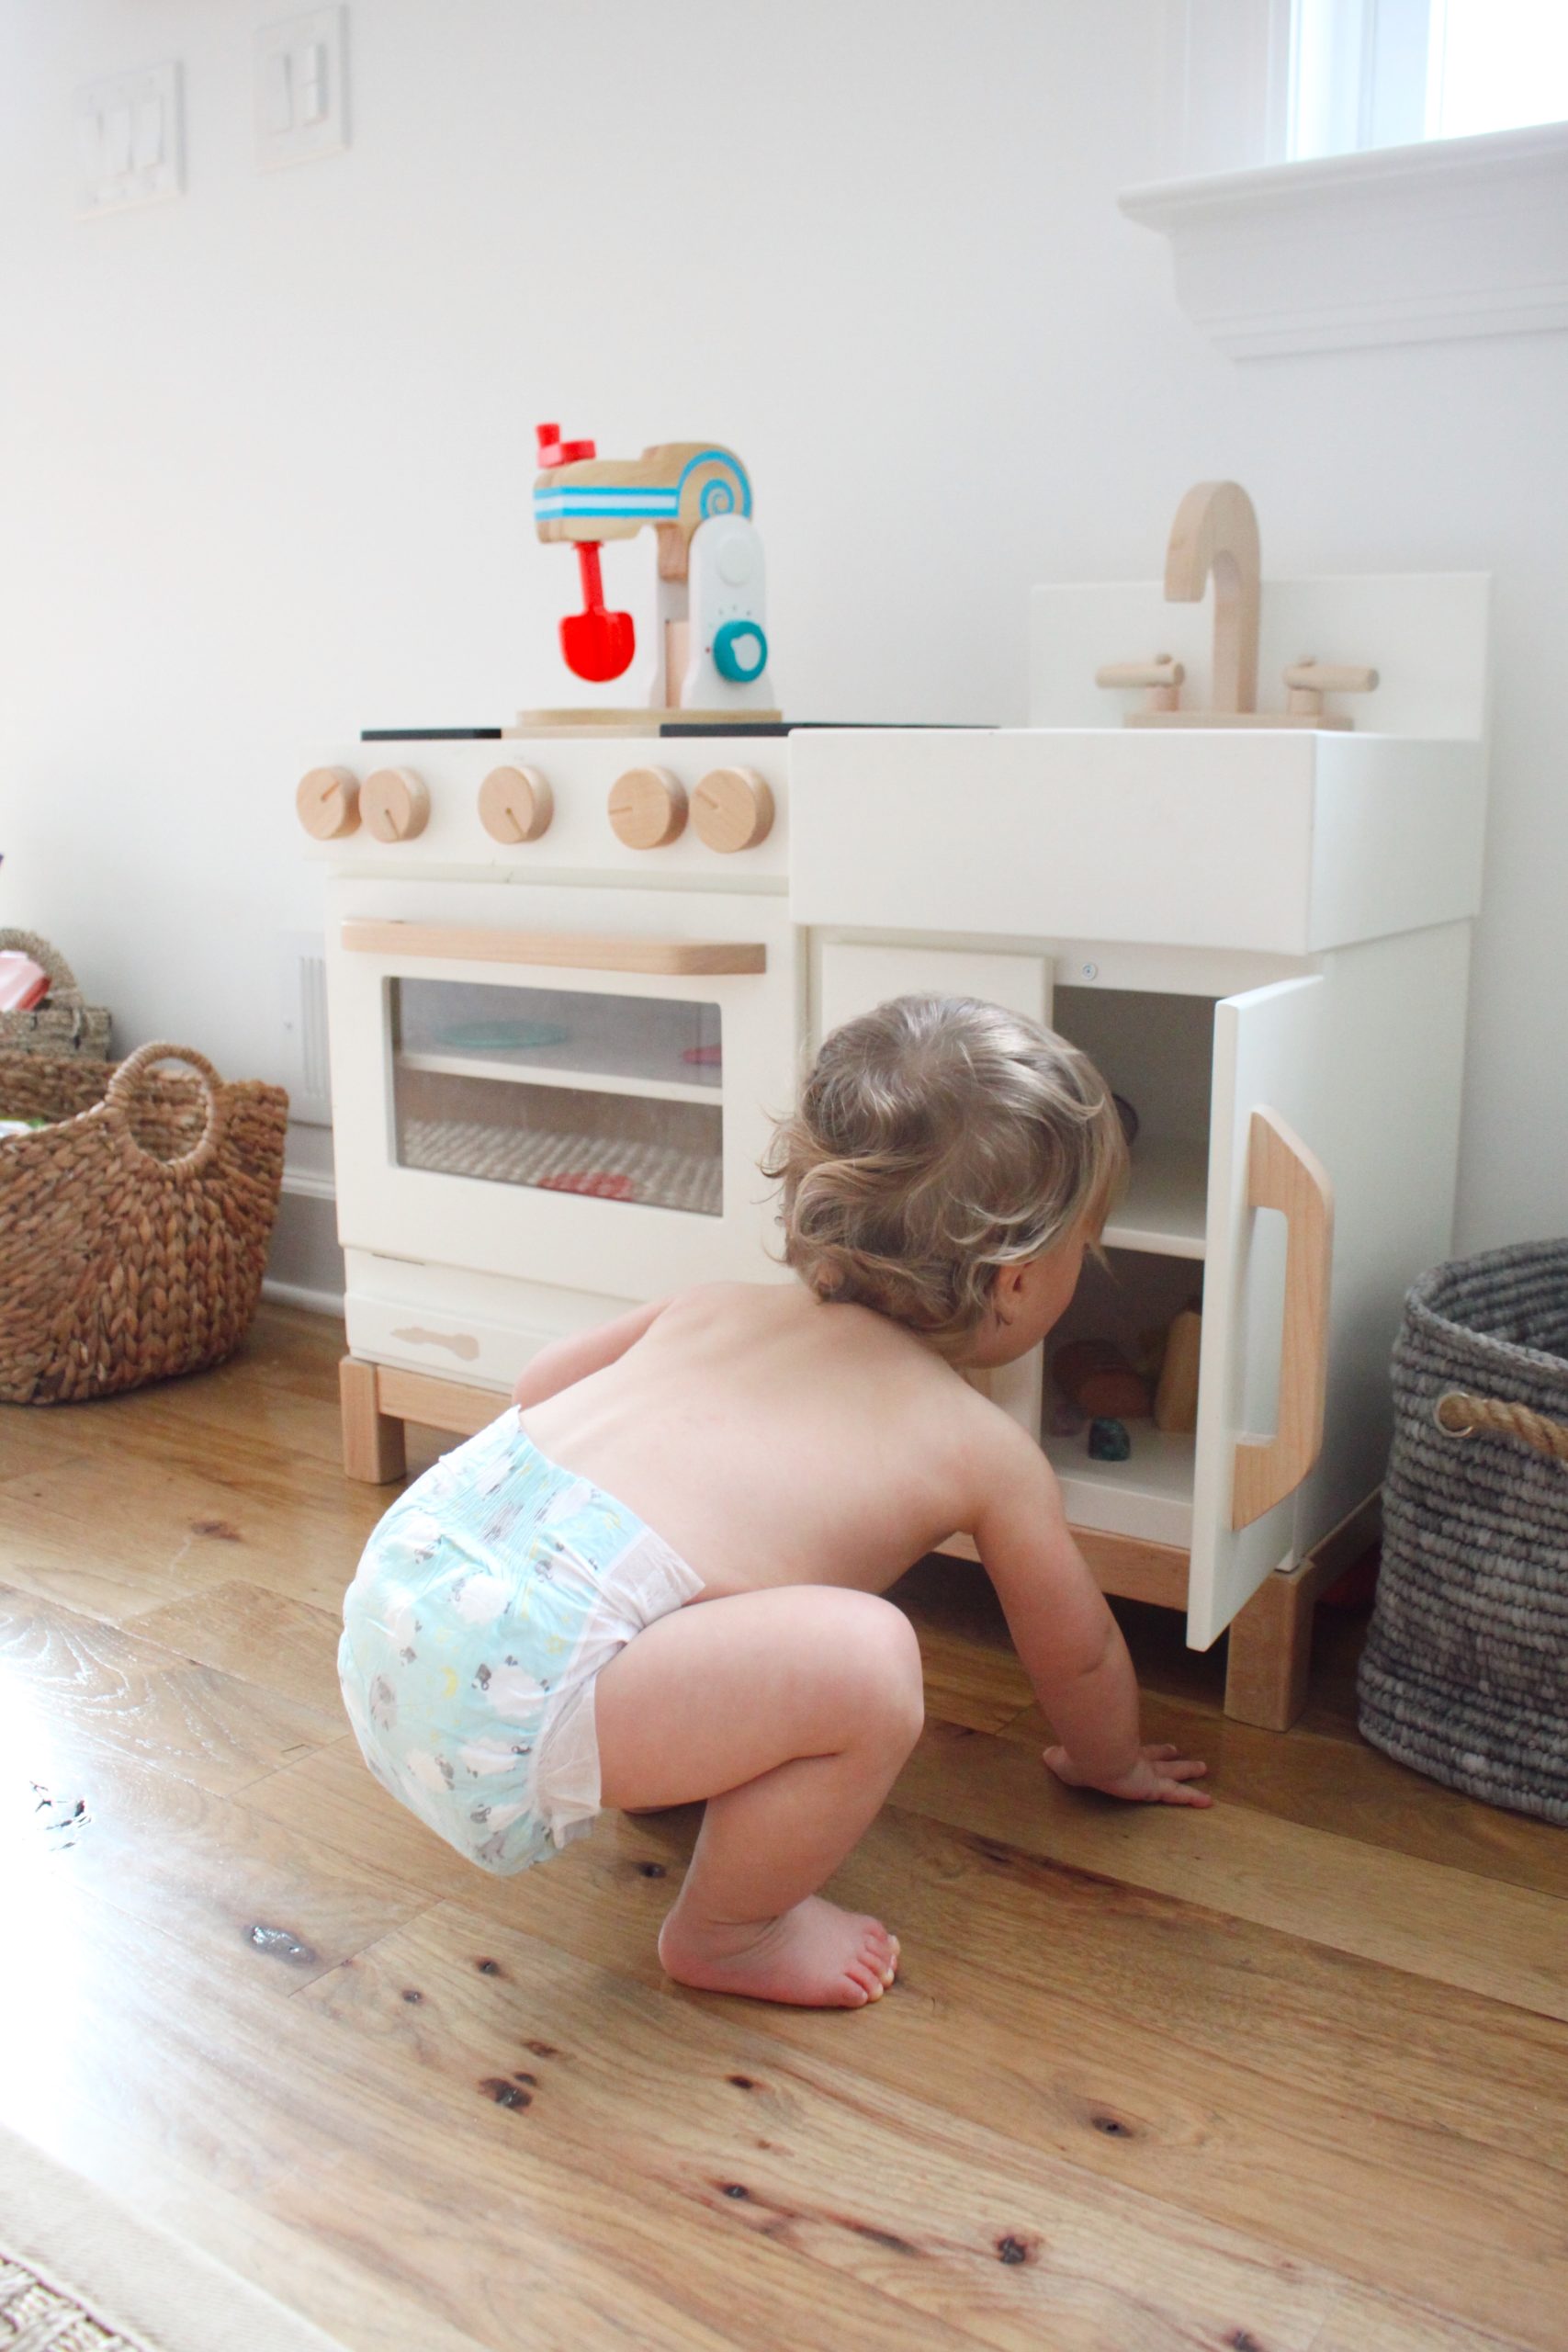 Baby forest playing with toy kitchen